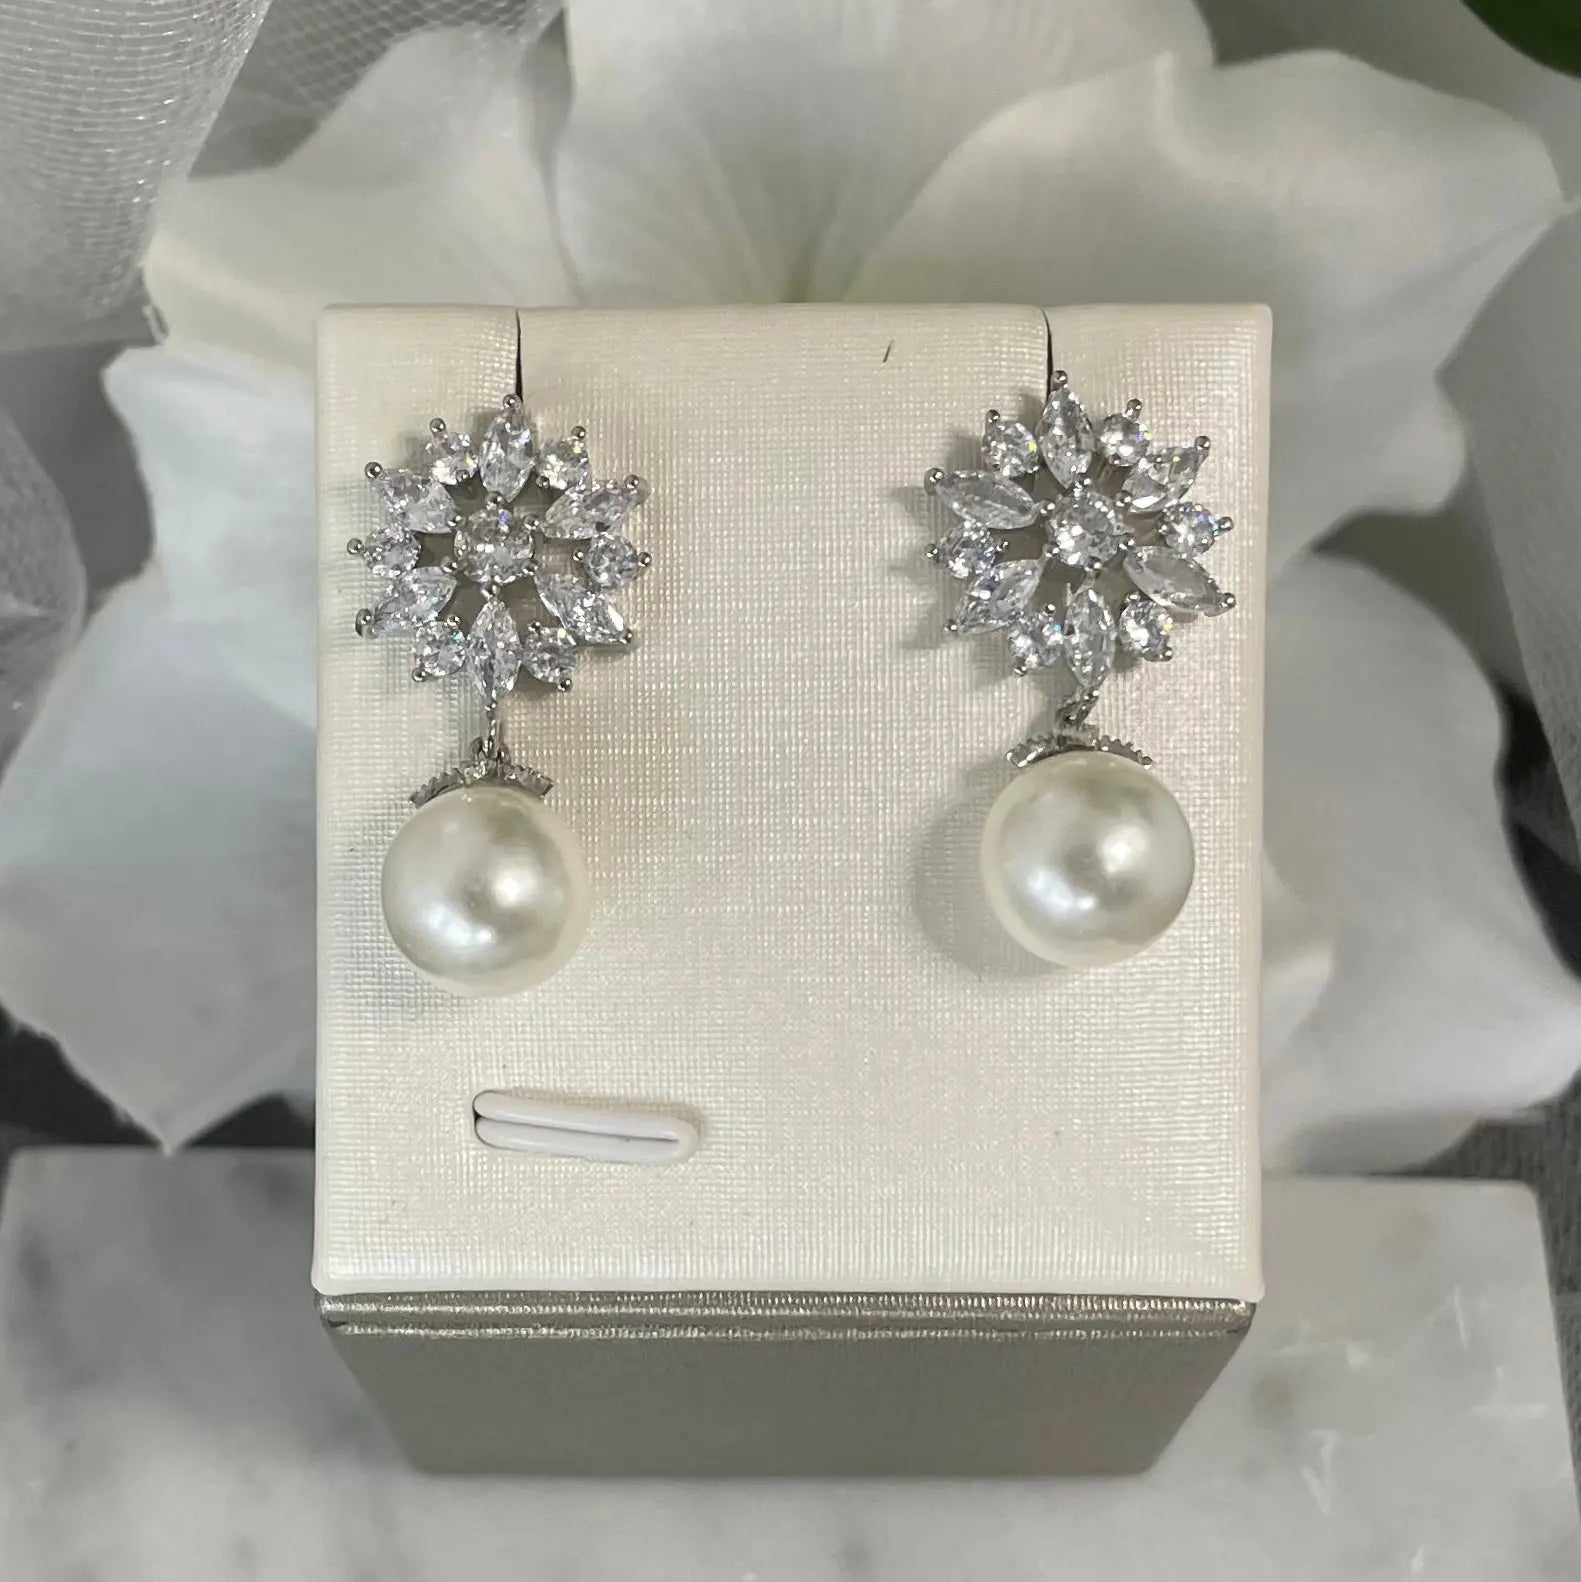 Pipa crystal pearl earrings featuring floral-inspired round crystals and a secure pearl drop, crafted in high-quality copper and zircon, available in gold and silver plating.